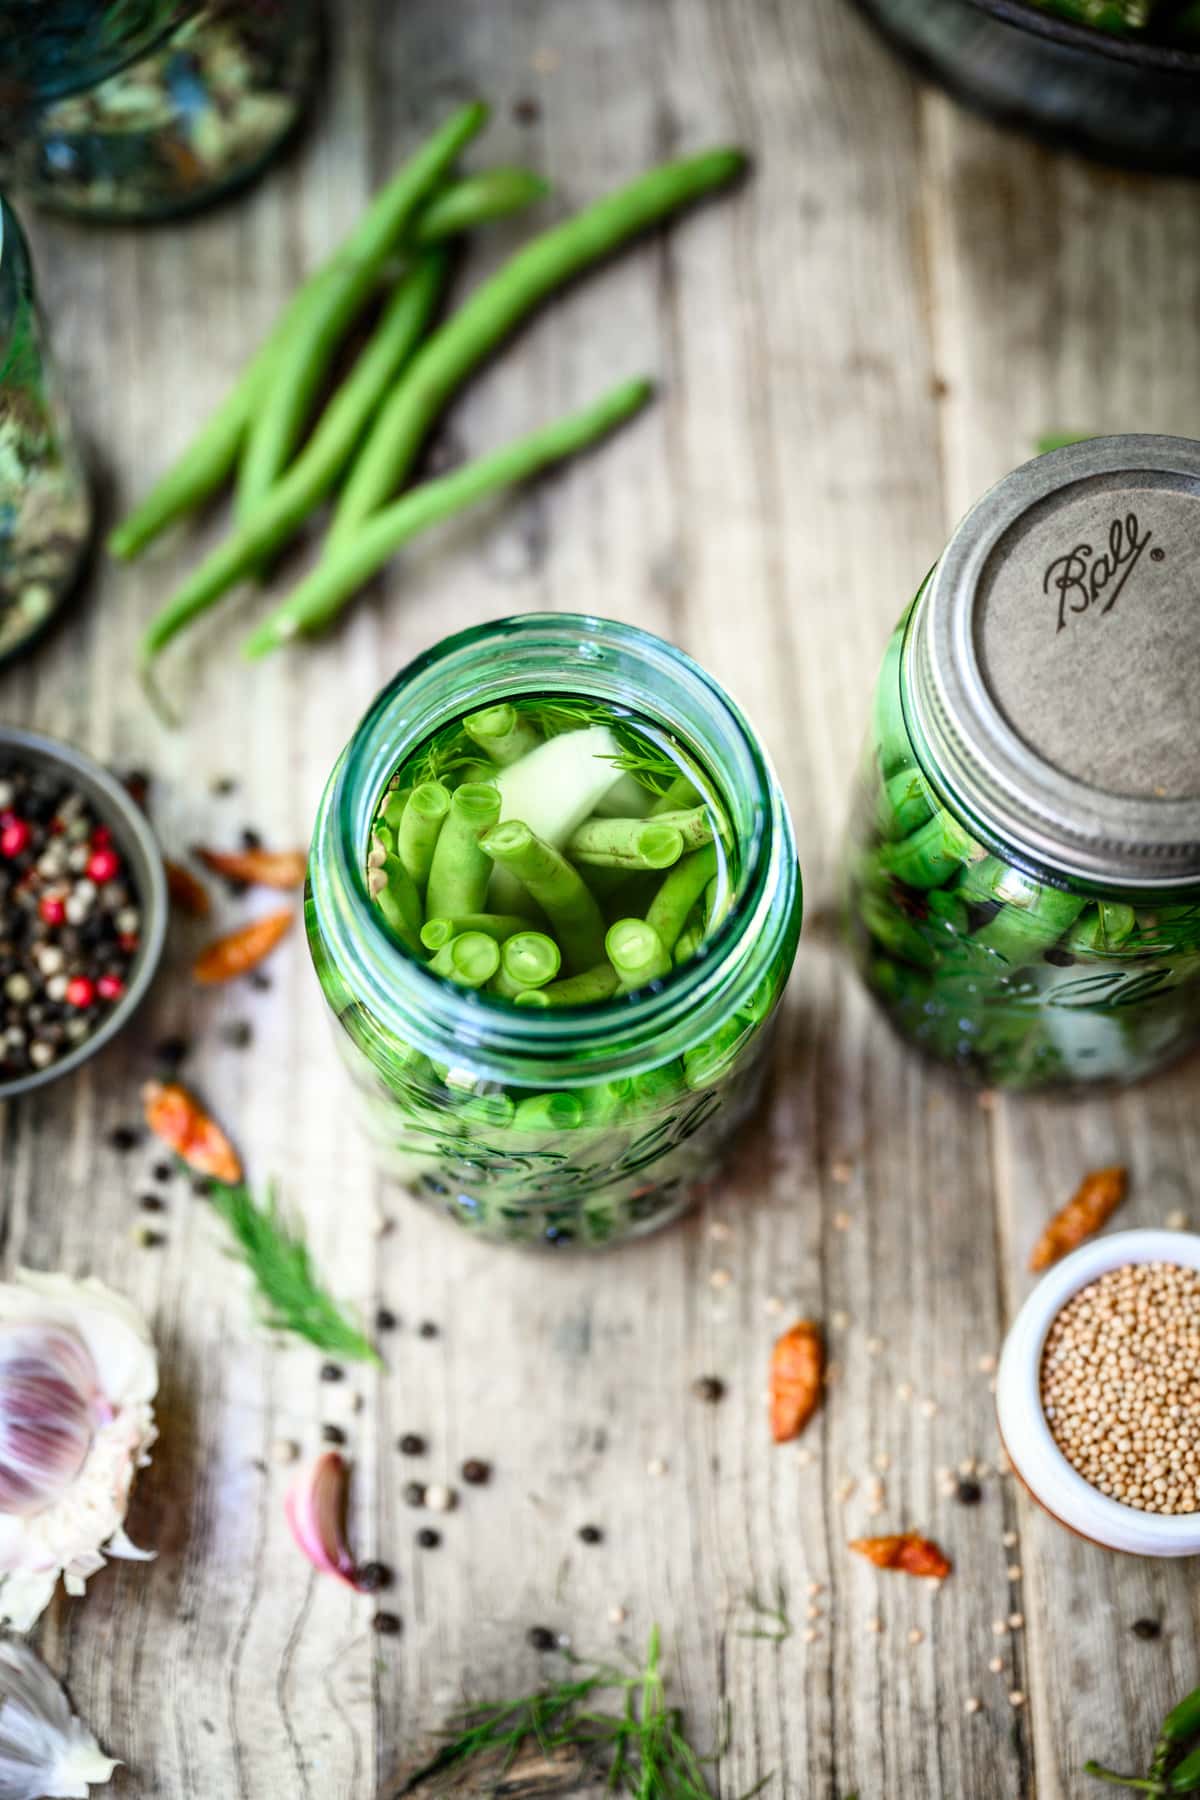 Overhead view of pickled green beans in a canning jar on wood table